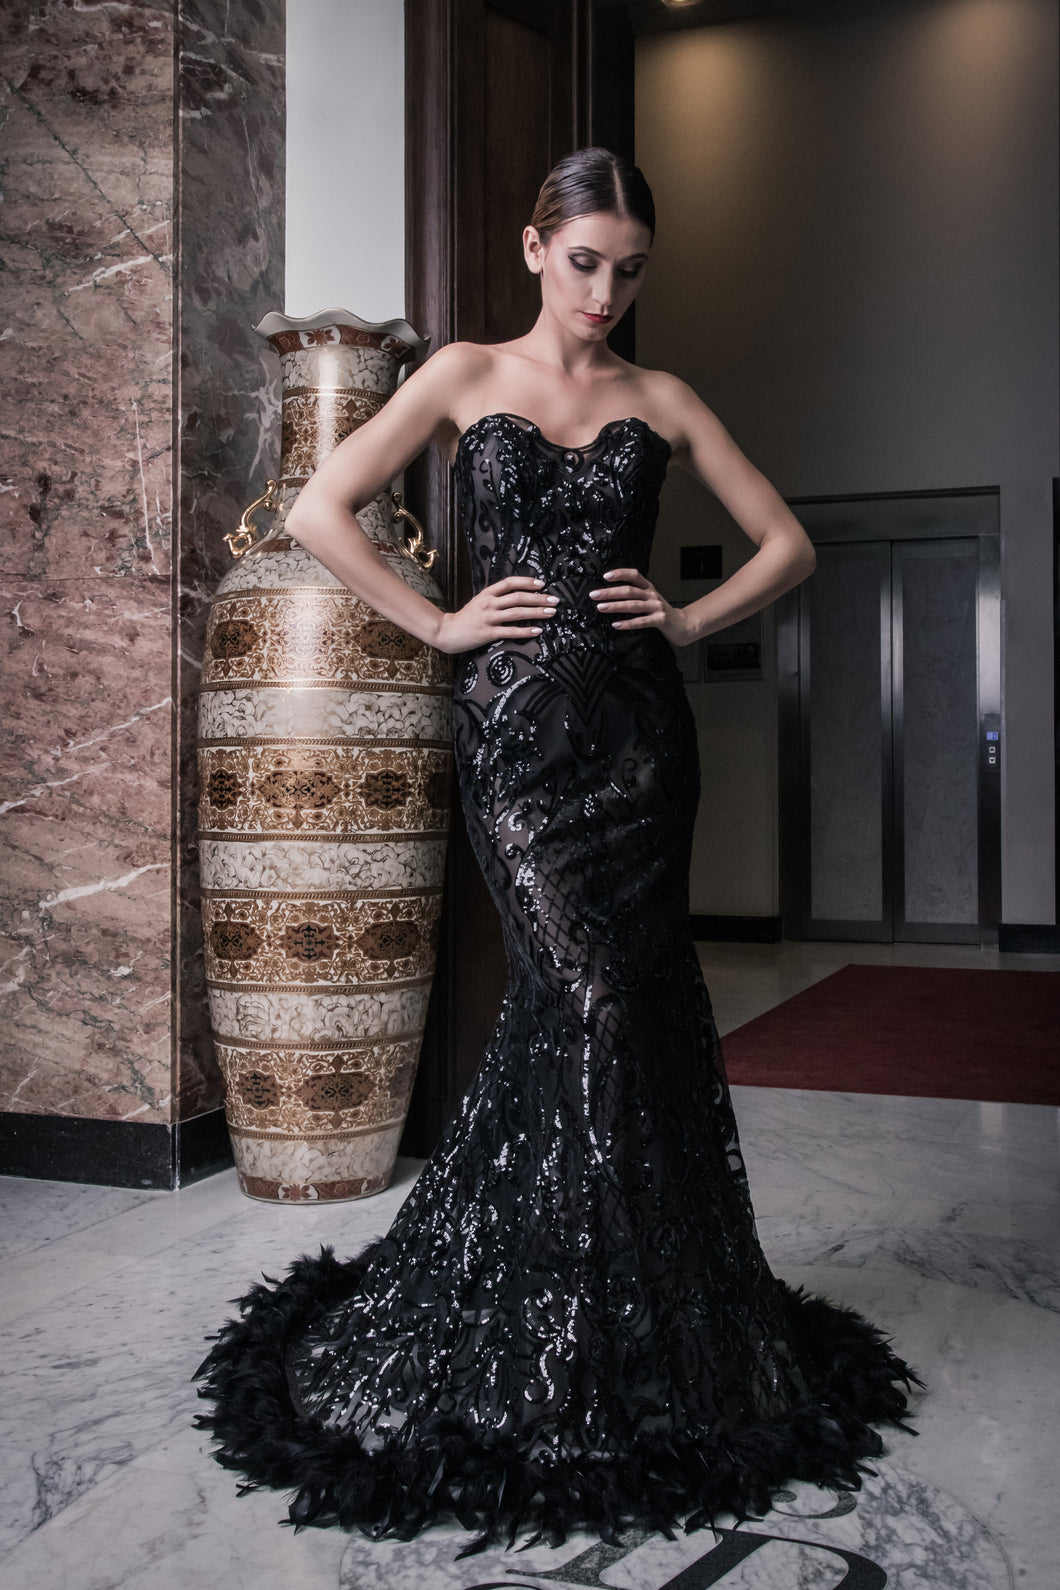 Evening dress, black lace, lace, feathers, stunning, gown, haute couture, designer, dark queen, exclusive, luxury